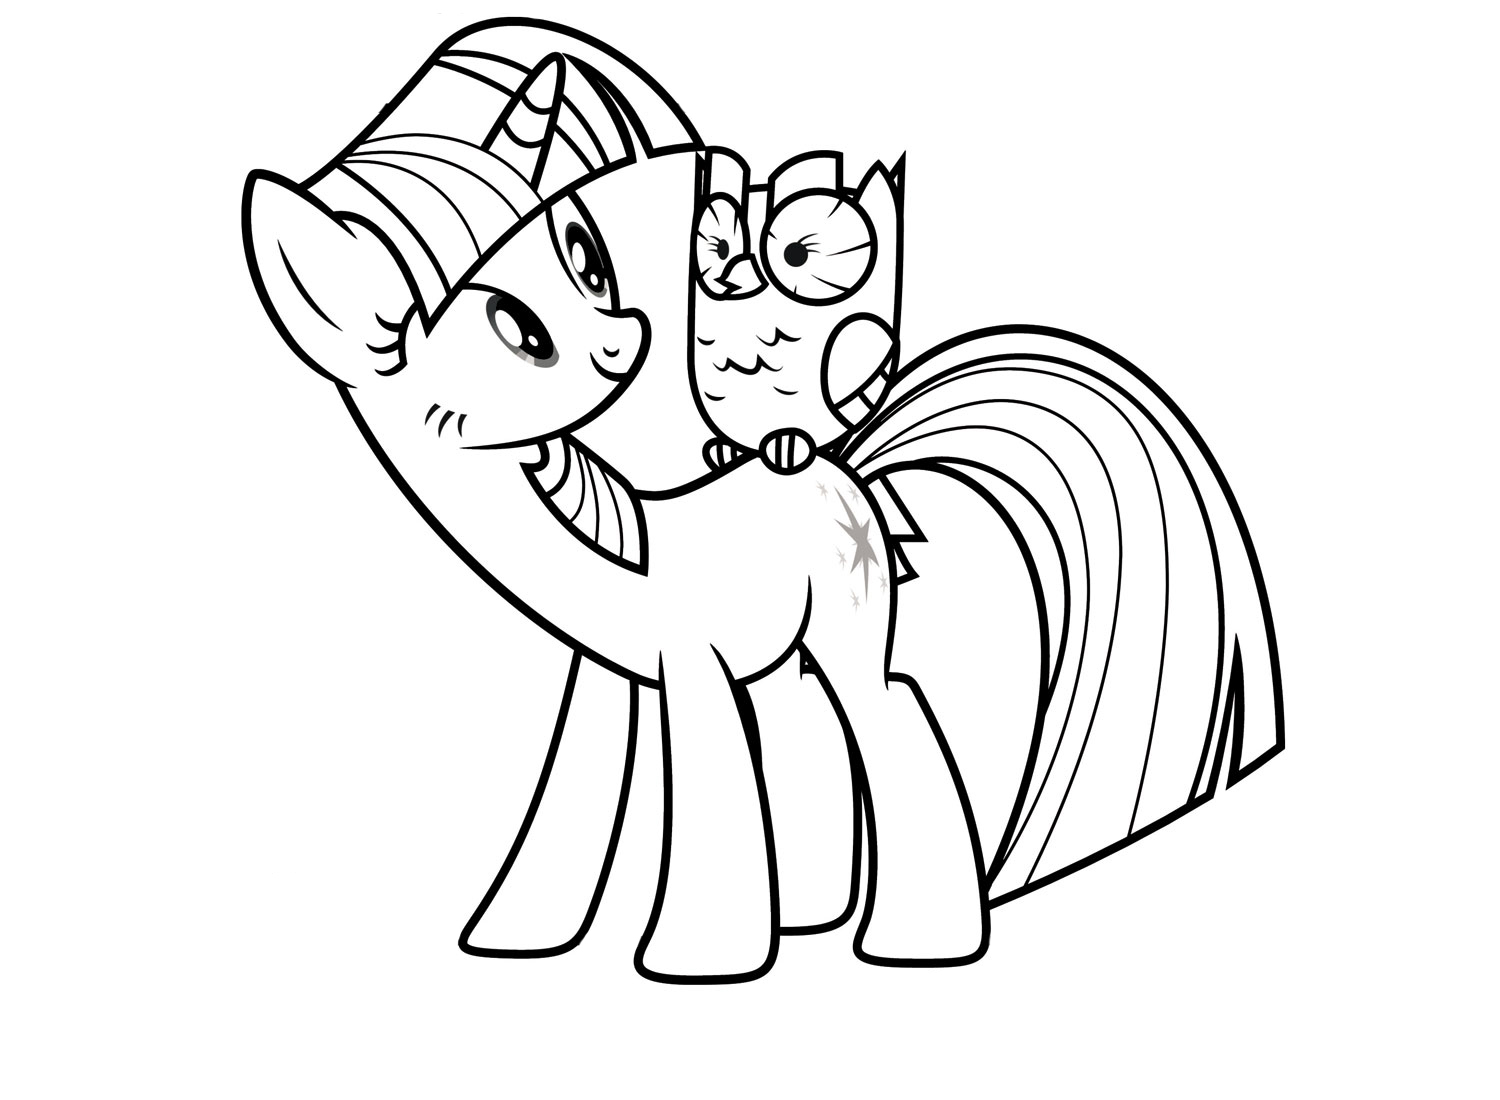 My Little Pony Unicorn Coloring Page For Girls 